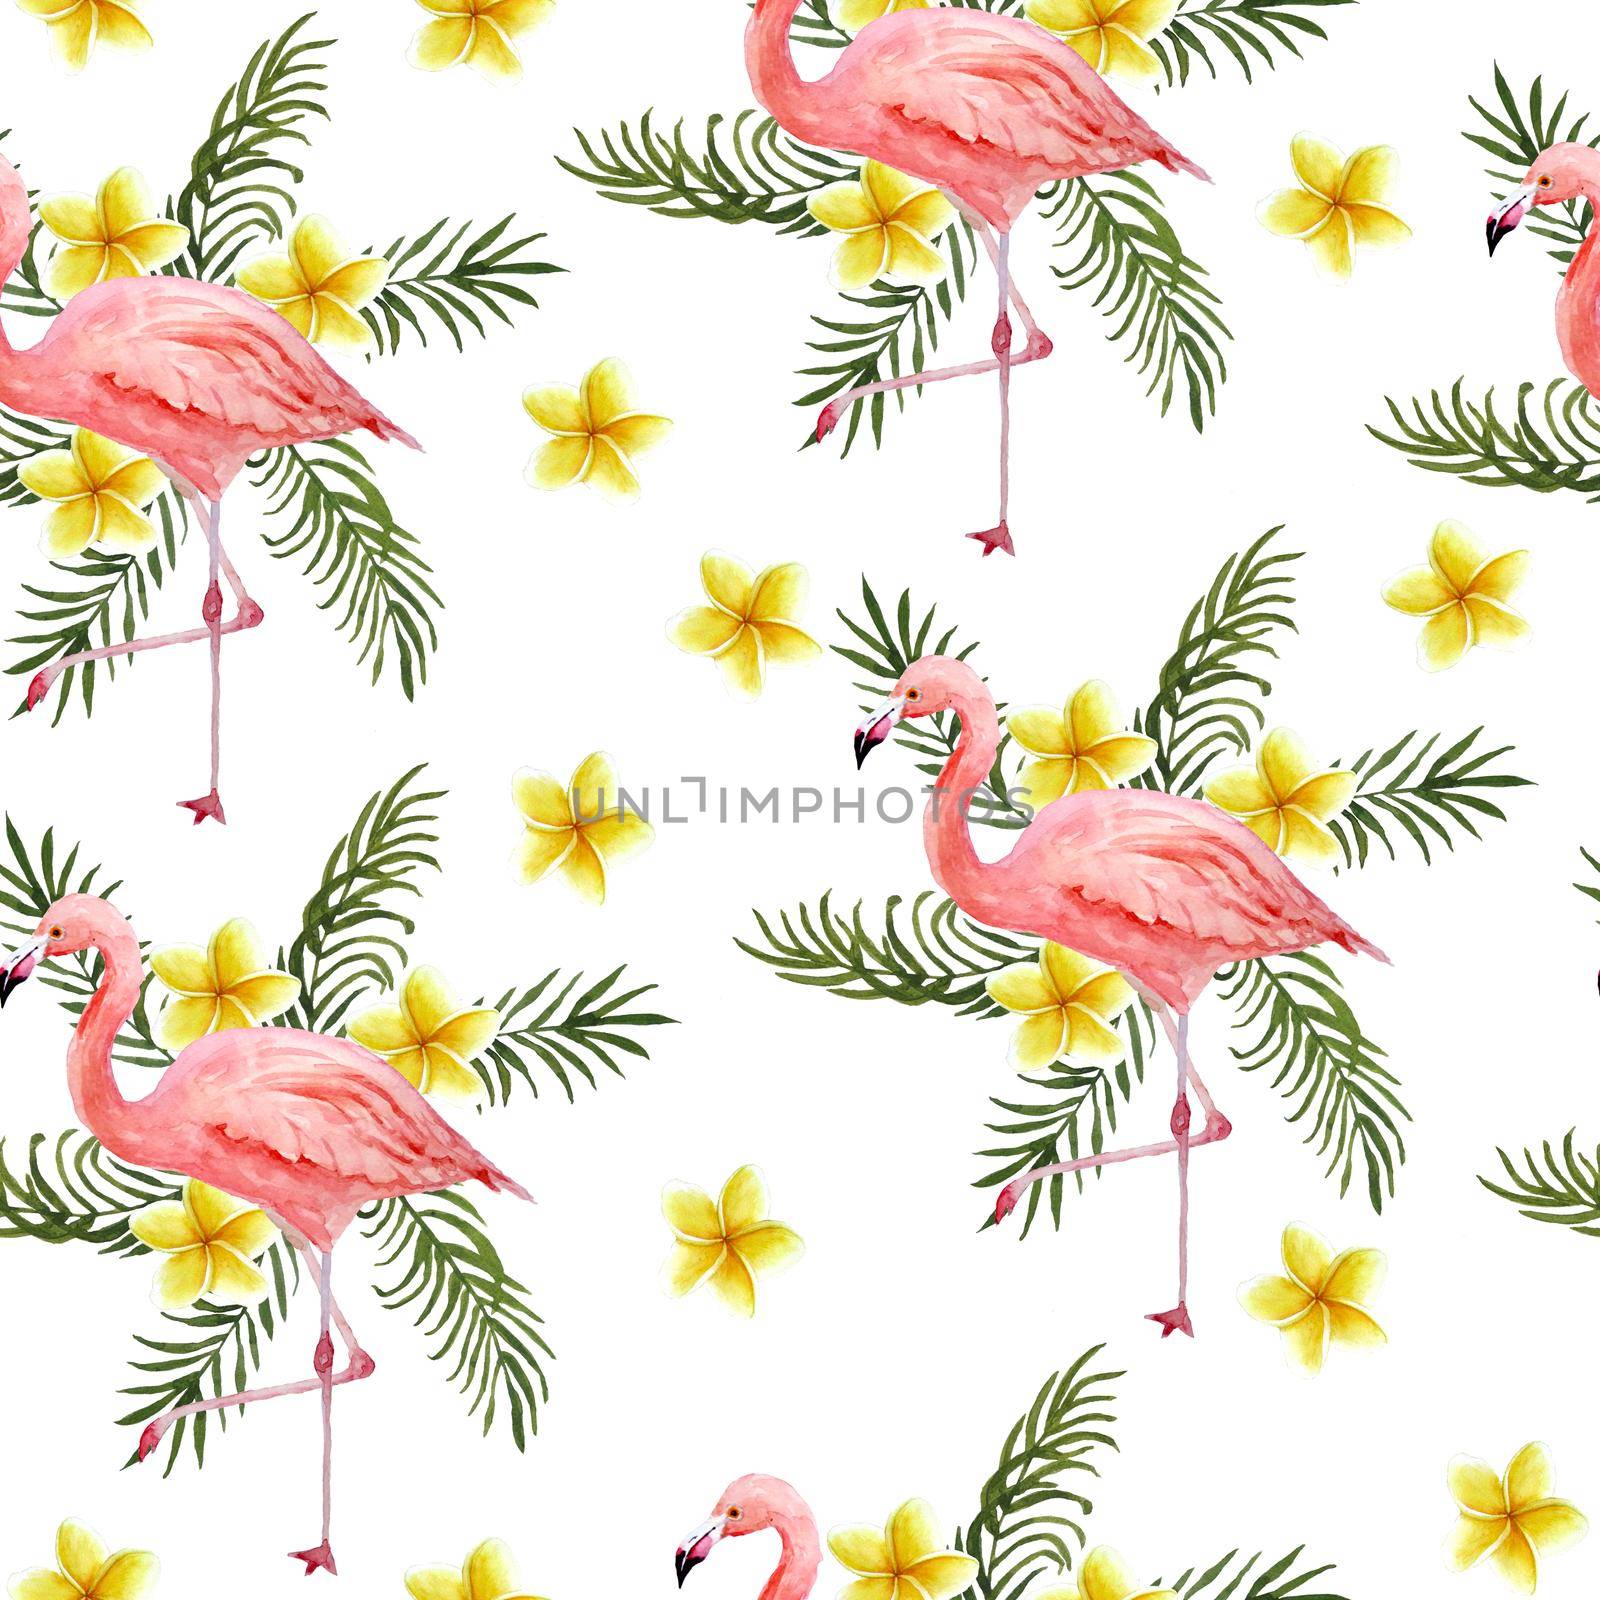 Seamless hand drawn watercolor pattern with pink flamingo, romantic couple in love, palm leaves plumeria frangipani flowers. Tropical exotic bird rose flamingos. Animal illustration. Wedding invitations. by Lagmar